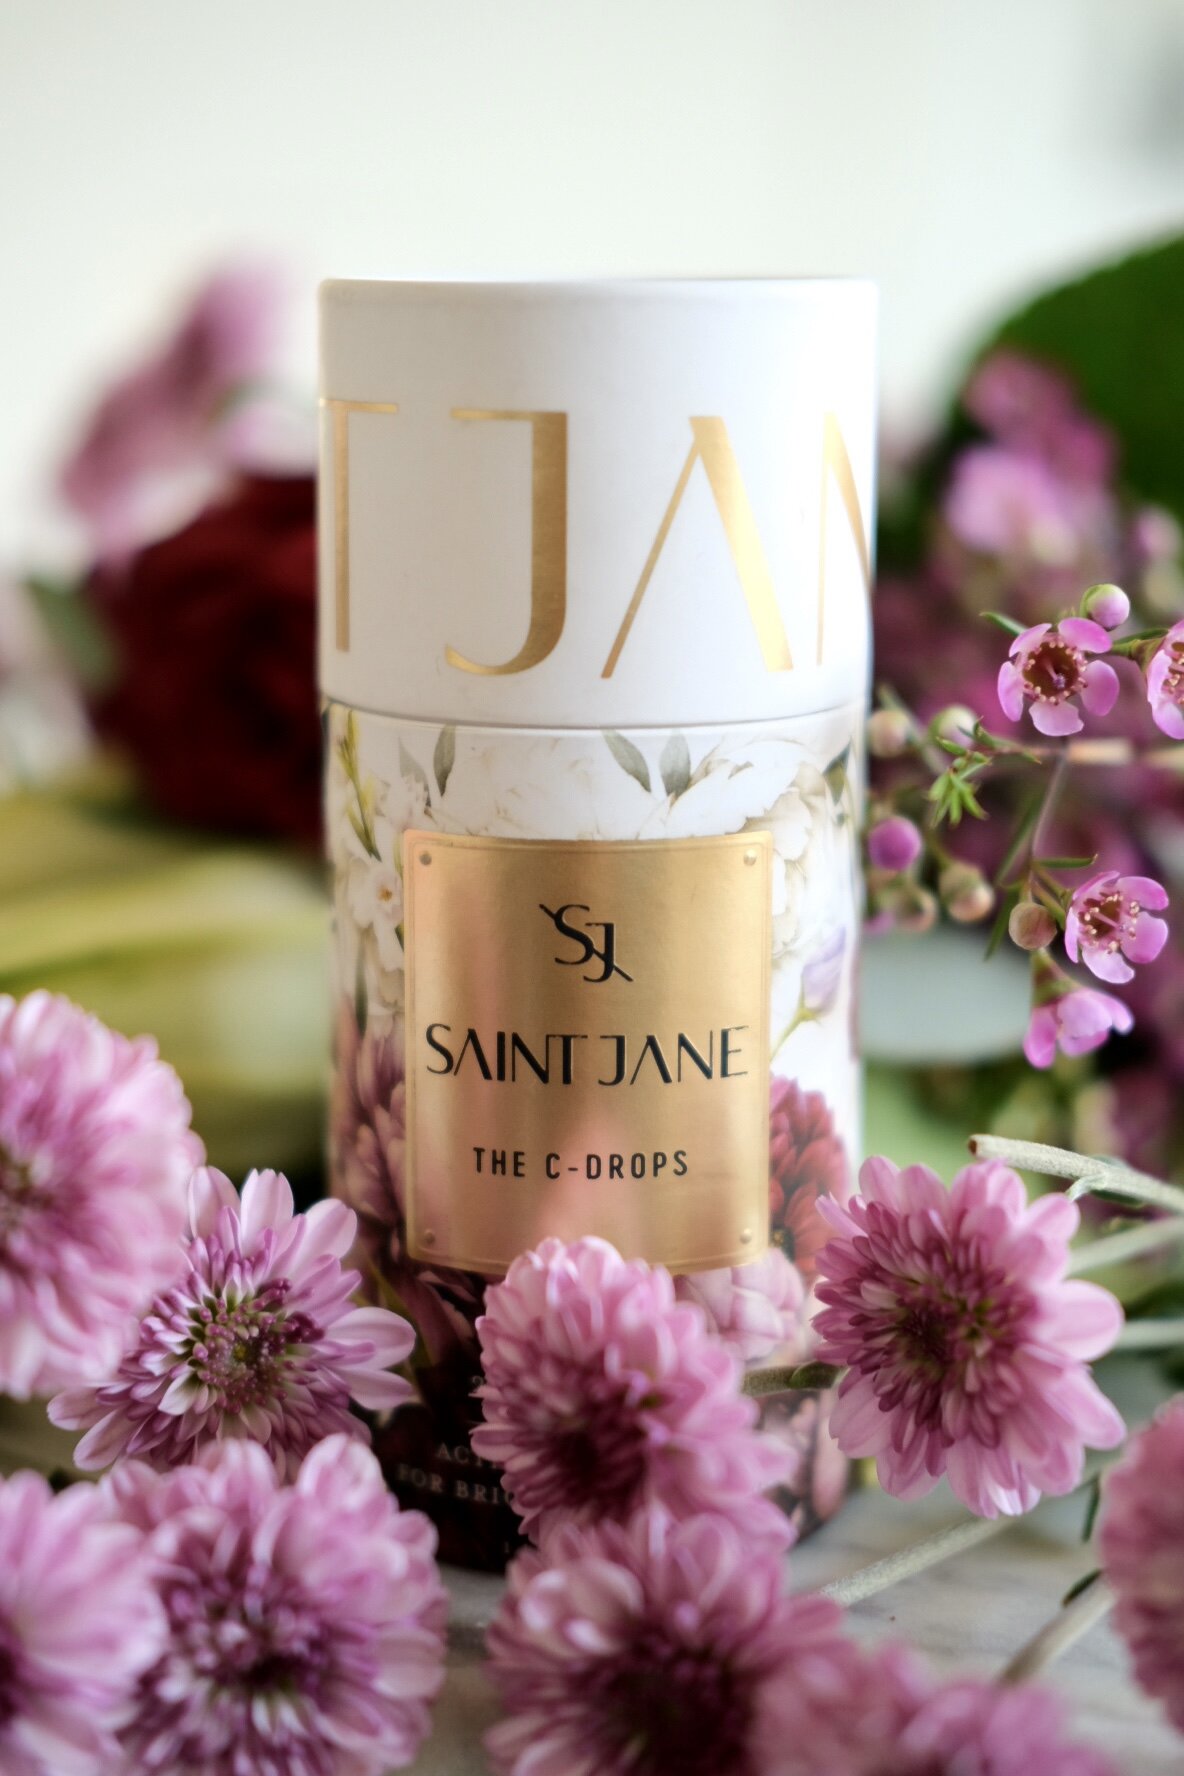 Saint Jane C Drops Review - Saint Jane Beauty is a luxury CBD beauty brand which I delve into in this Saint Jane Review. Saint Jane Beauty infuses every formula with carefully-curated, sustainably sourced botanicals and high concentrations of CBD. Sa